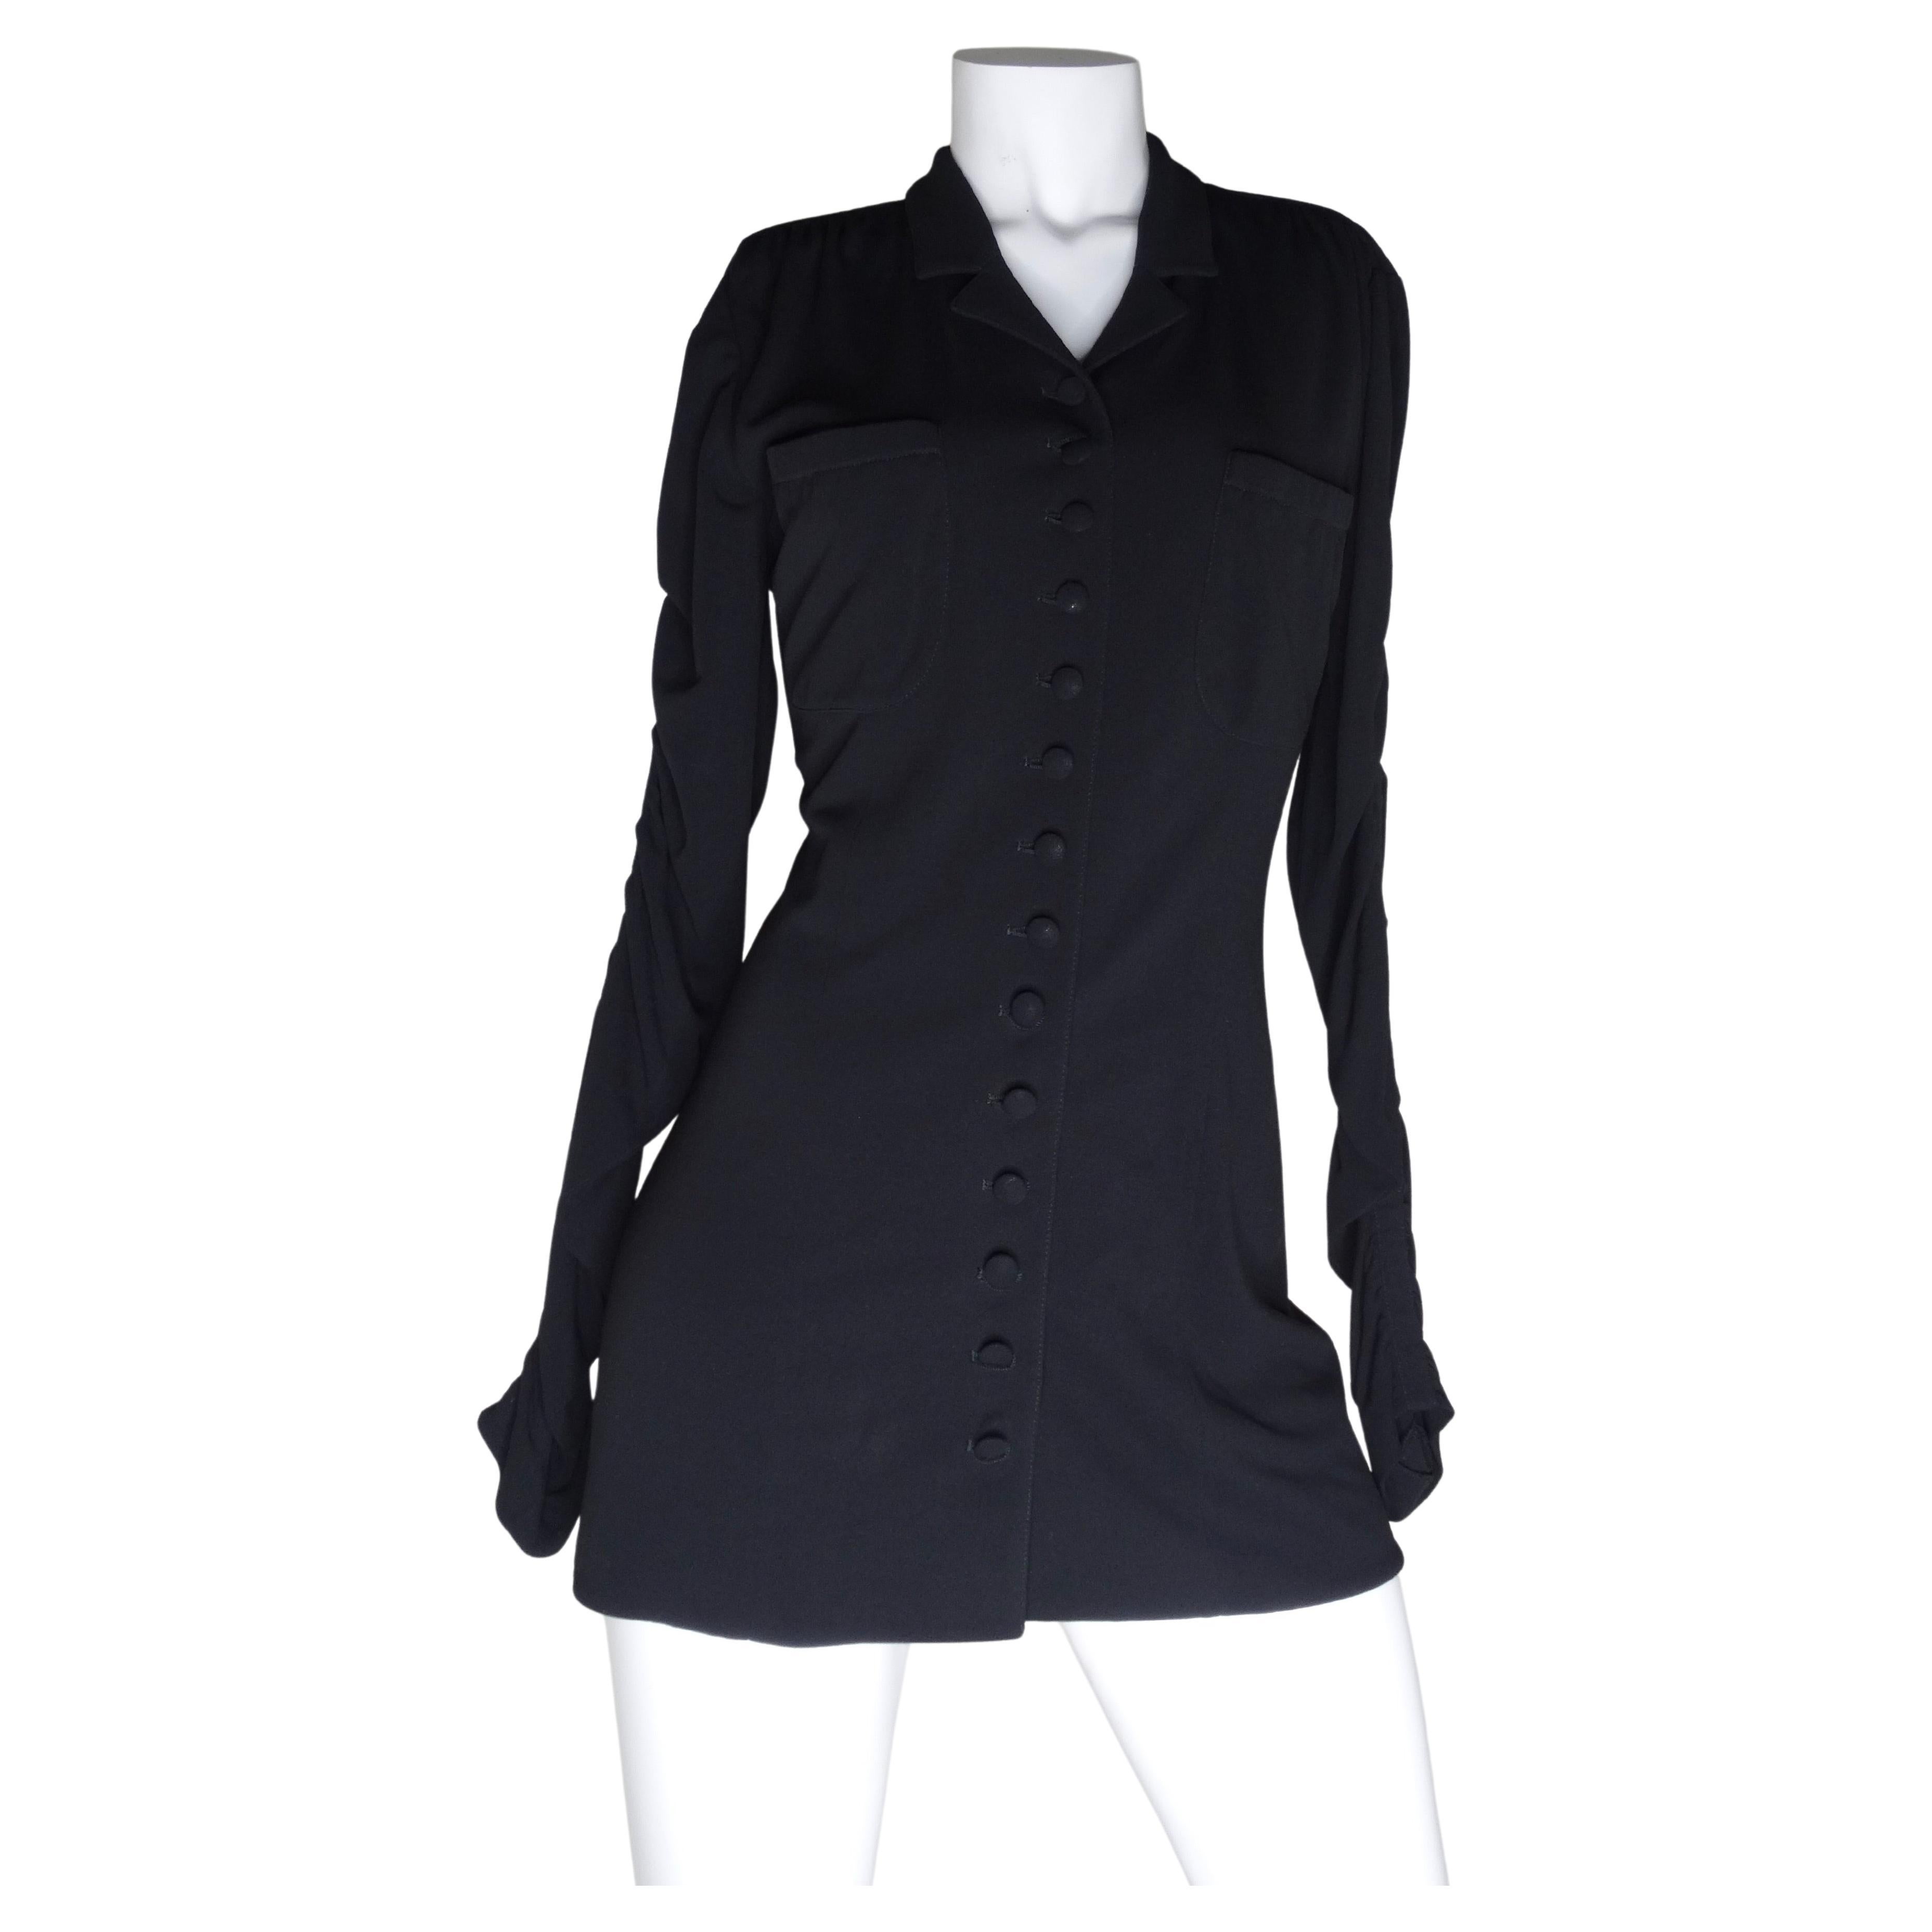 Iconic Karl Lagerfeld button down! Featuring a structured collar, two breast pockets and shoulder pads, this piece is as functional as it is versatile. The sleeves are fully ruched which adds such a fun flare to the otherwise classic and effortless